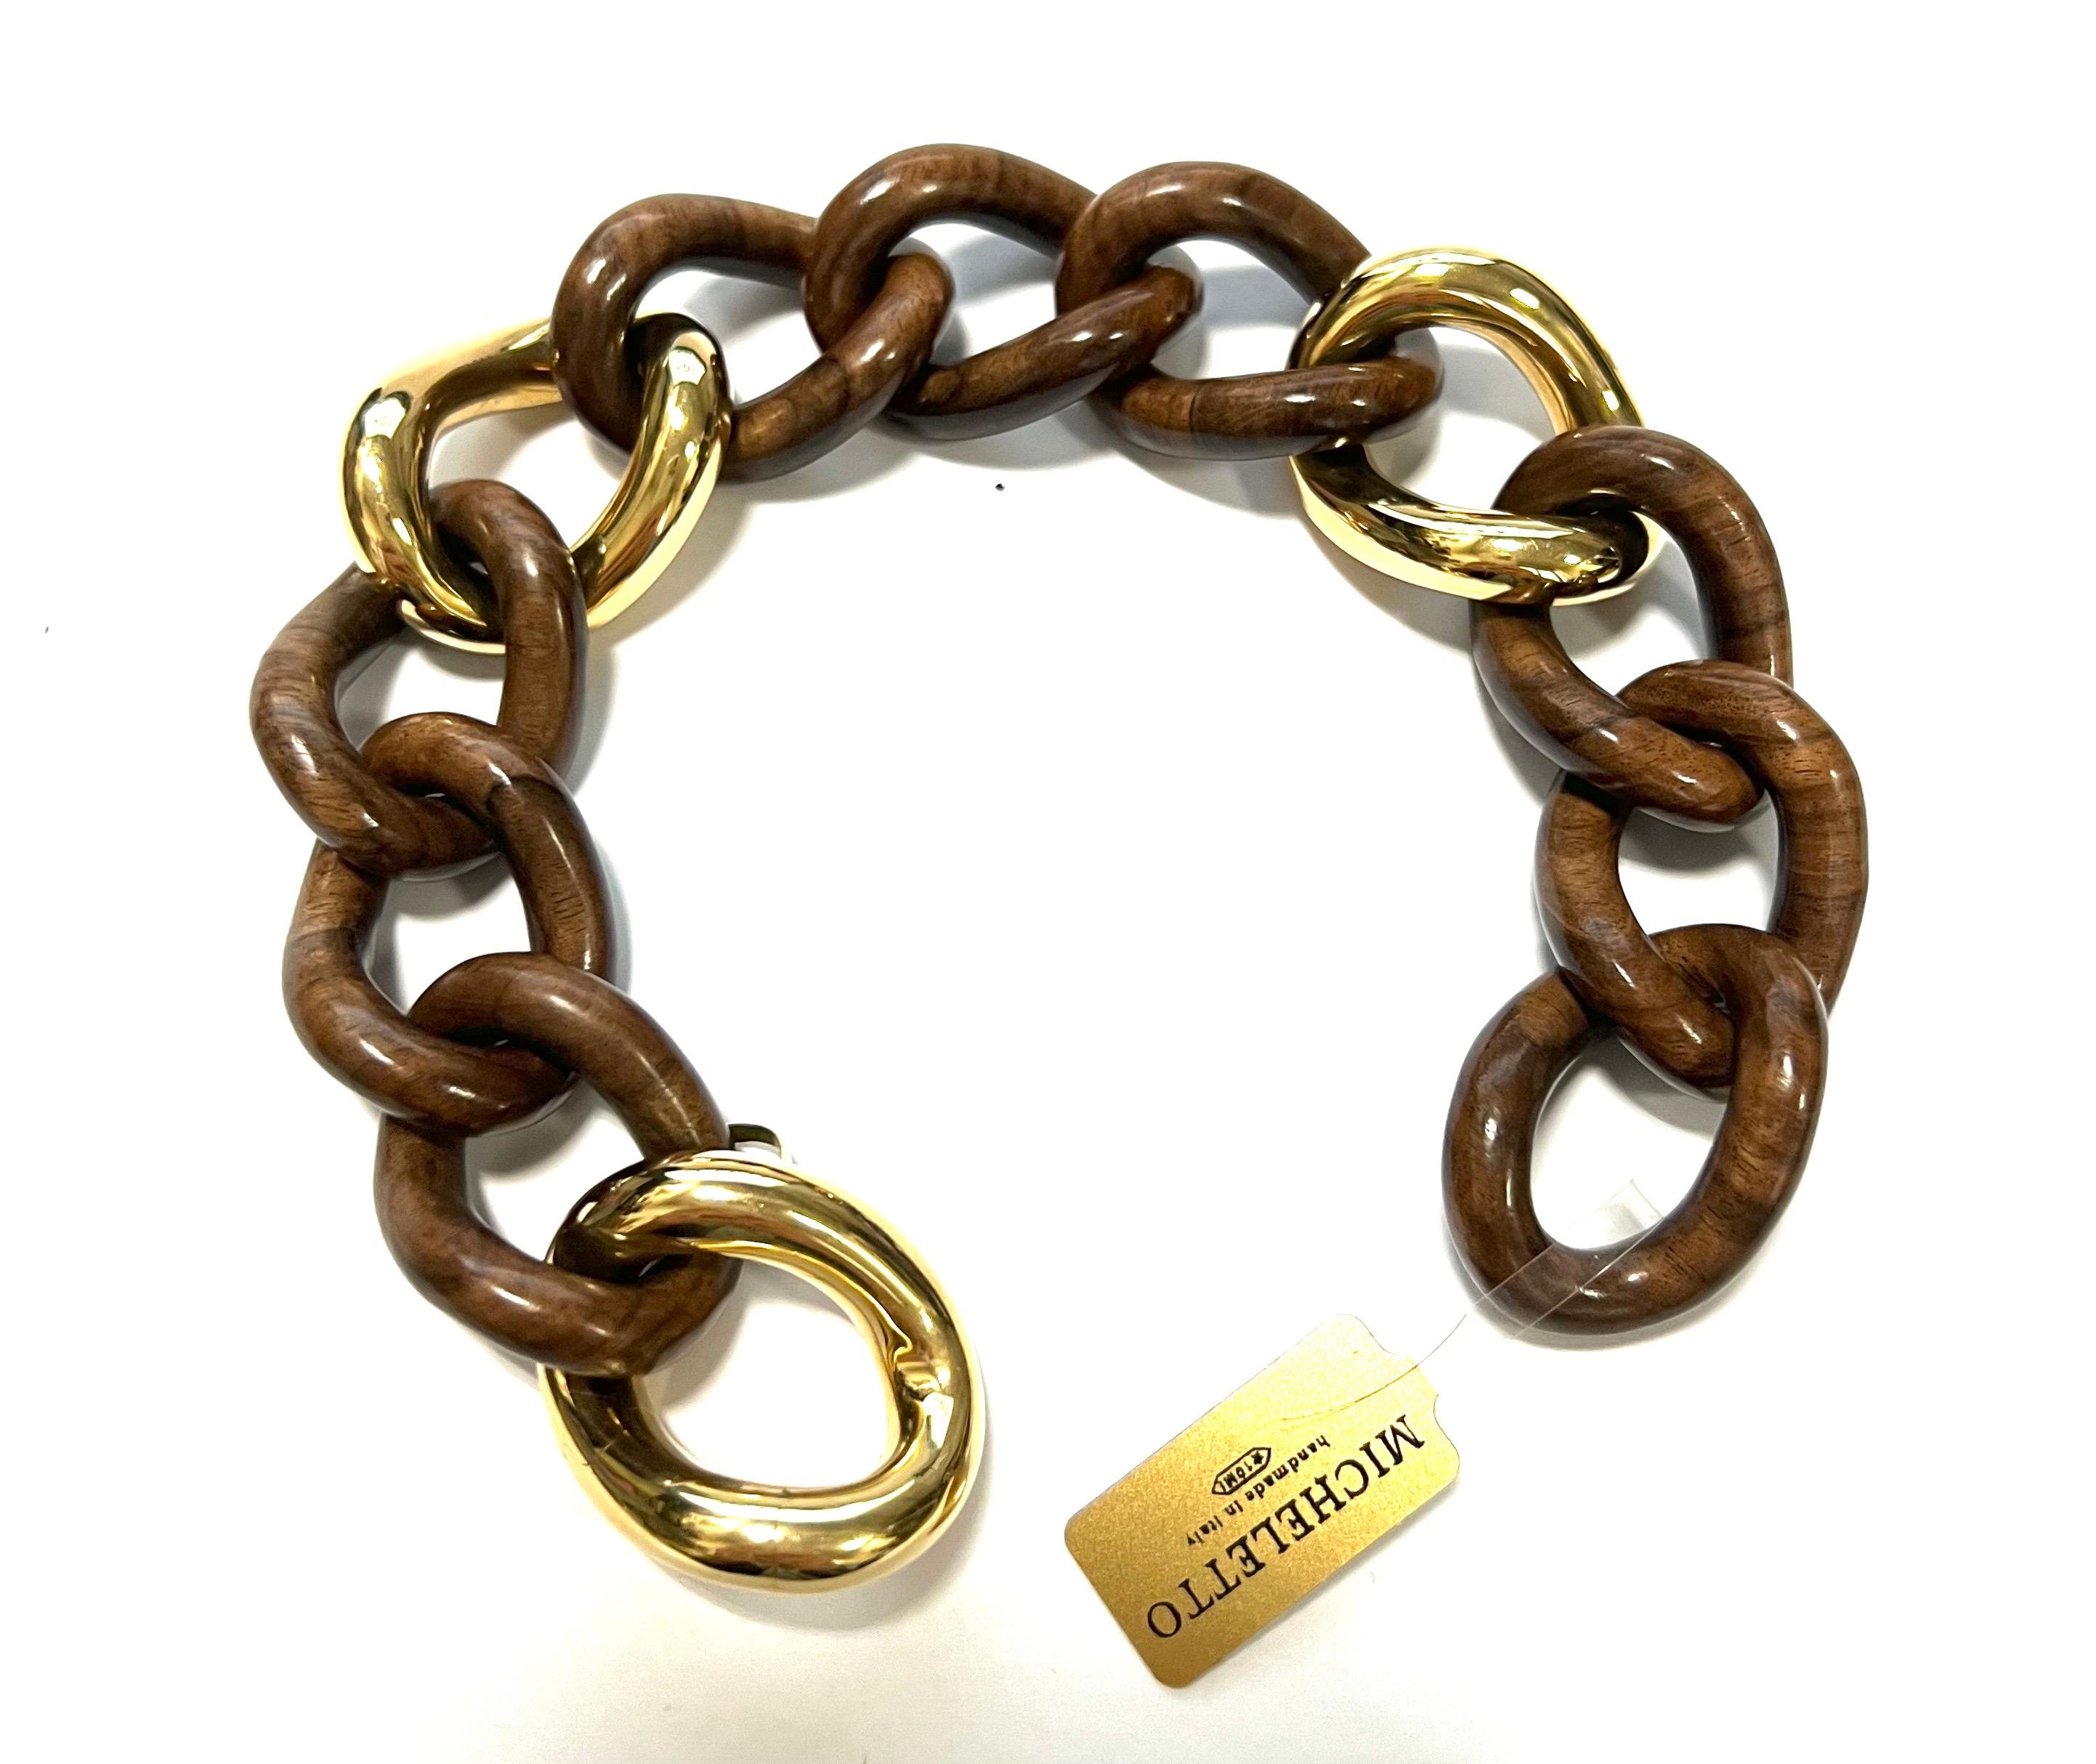 18 Karat Yellow Gold and Palissander Groumette Link Bracelet
This bracelet has a hidden opening.
Total weight gr. 37.6
Gold weight gr. 21.7
Length cm. 20
Stamp 750, 10 MI, ITALY

This bracelet can make set with 4659-Z 15/B (necklace)